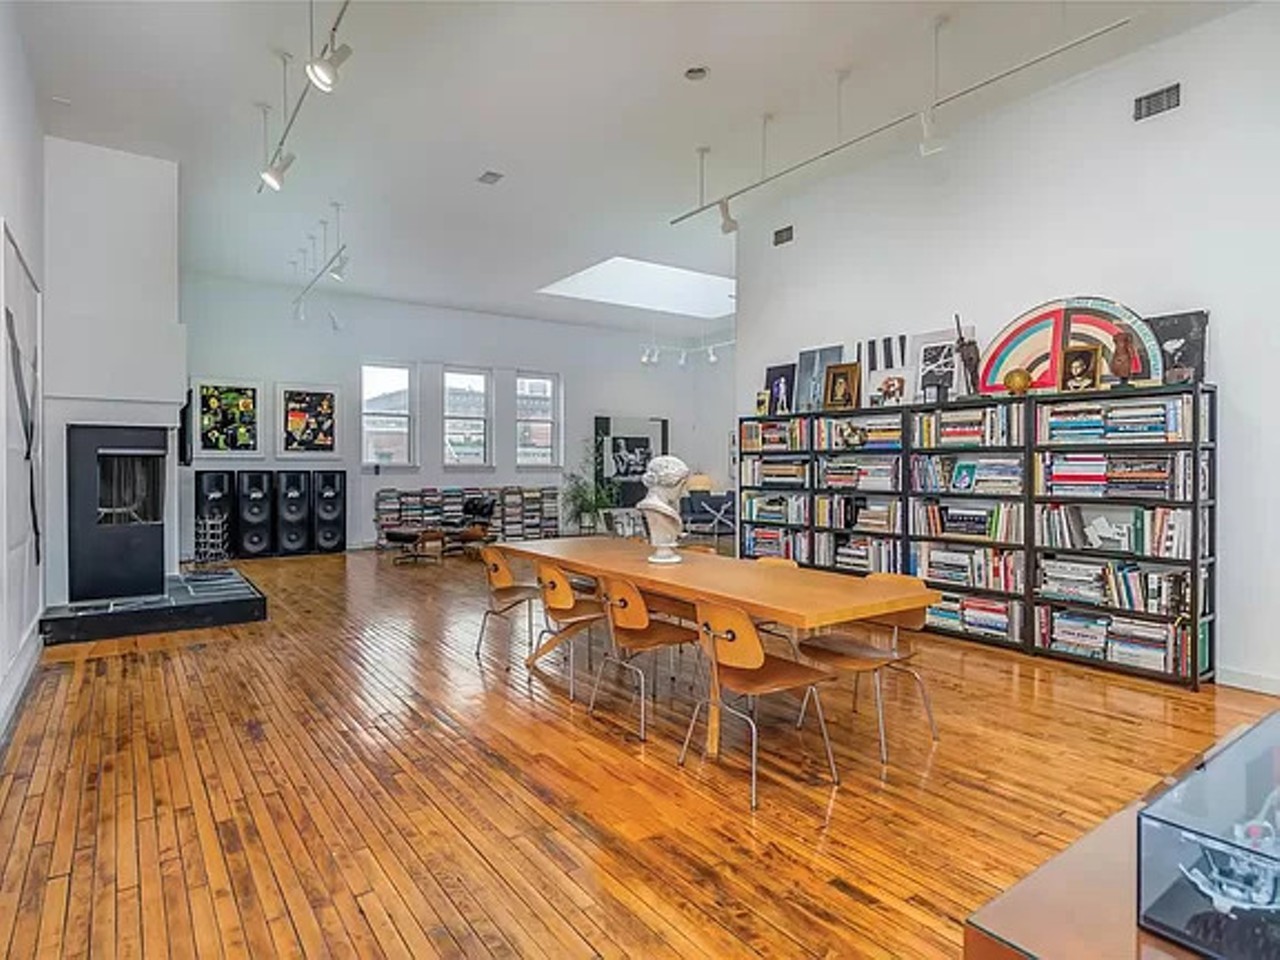 This Converted Firehouse Downtown Is a St. Louis Dream Home [PHOTOS]